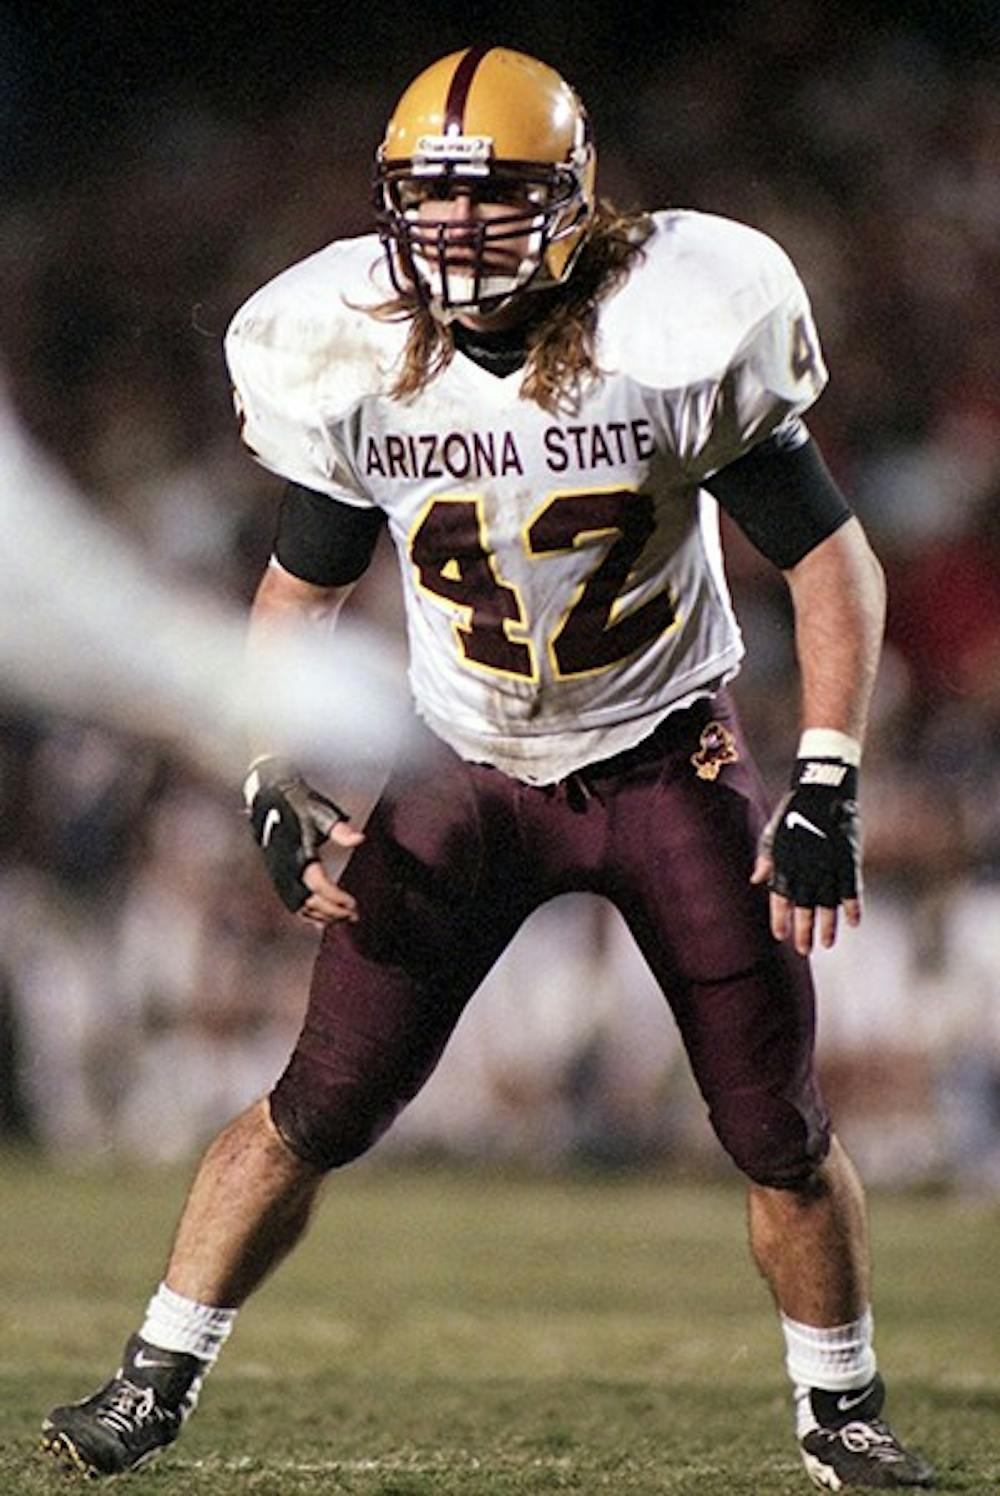 Pat Tillman, former linebacker for the Sun Devils, lines up before a play. (Photo courtesy of ASU Athletics)